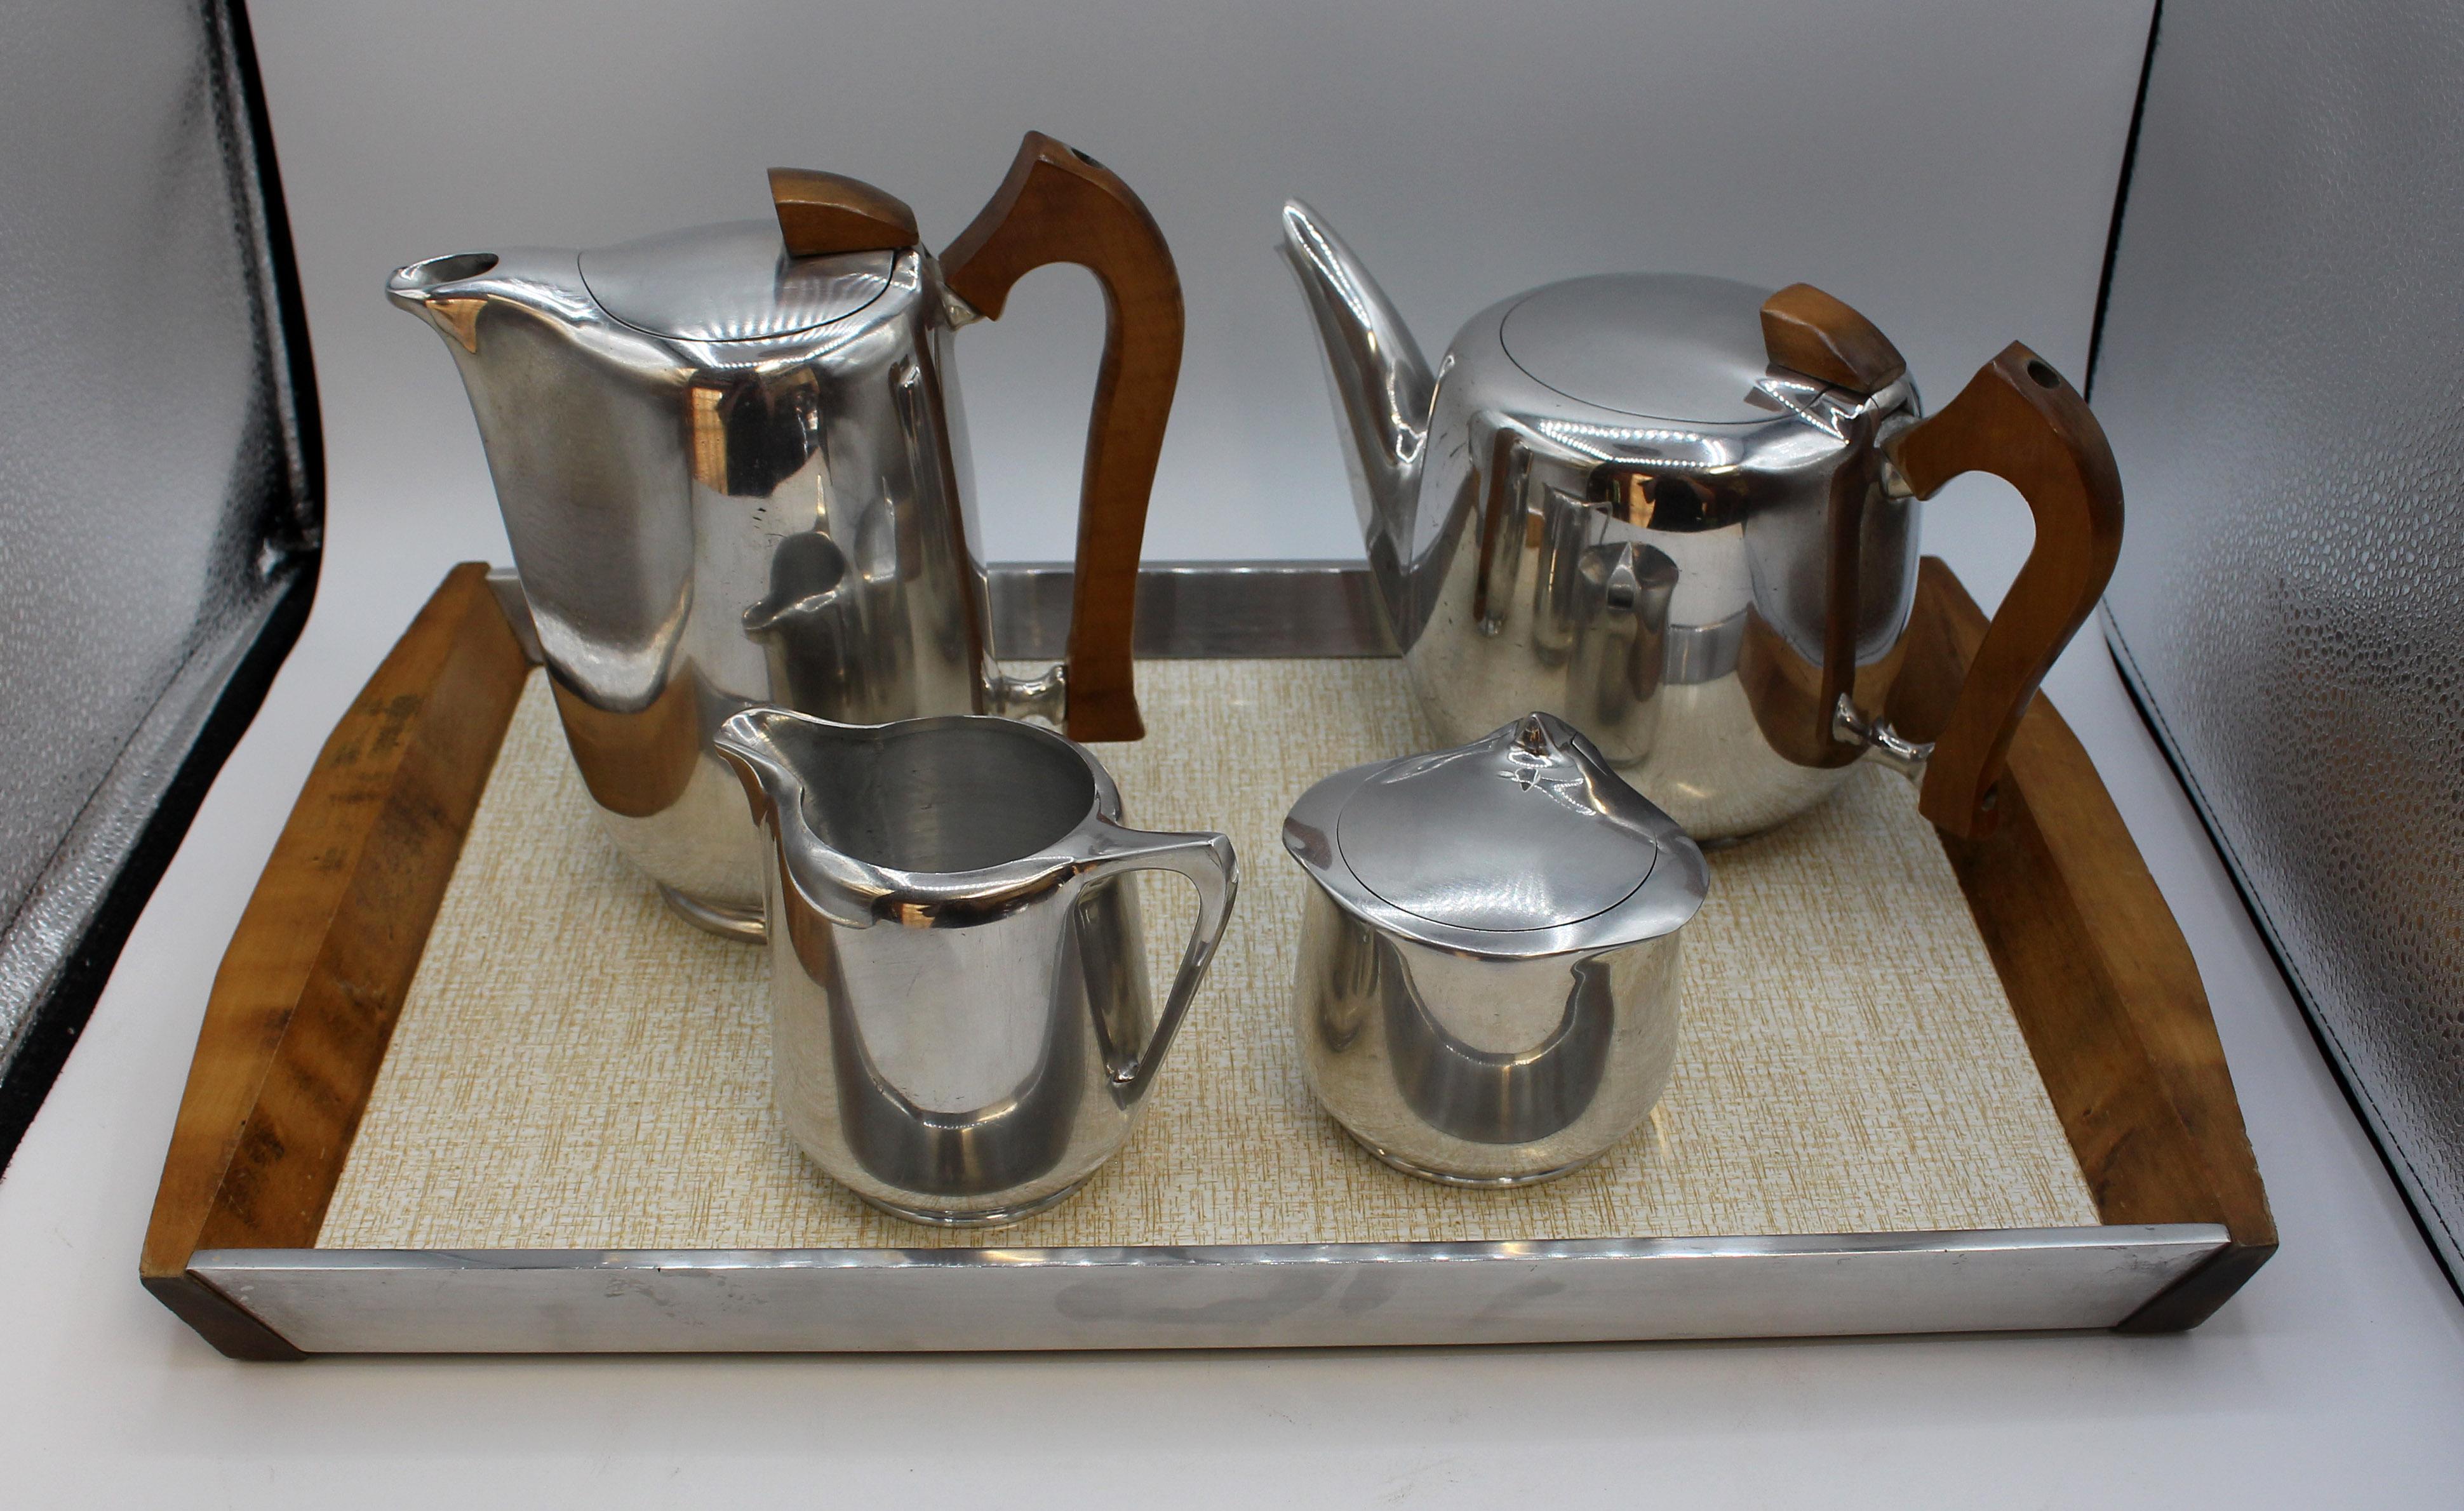 1950s-60s Picquot Ware tea & coffee set with tray. Made in England. Aluminum with shaped wood handles. Great mid century modern design! Tea pot, coffee pot, creamer, lidded sugar & tray. Tray: 18 5/8